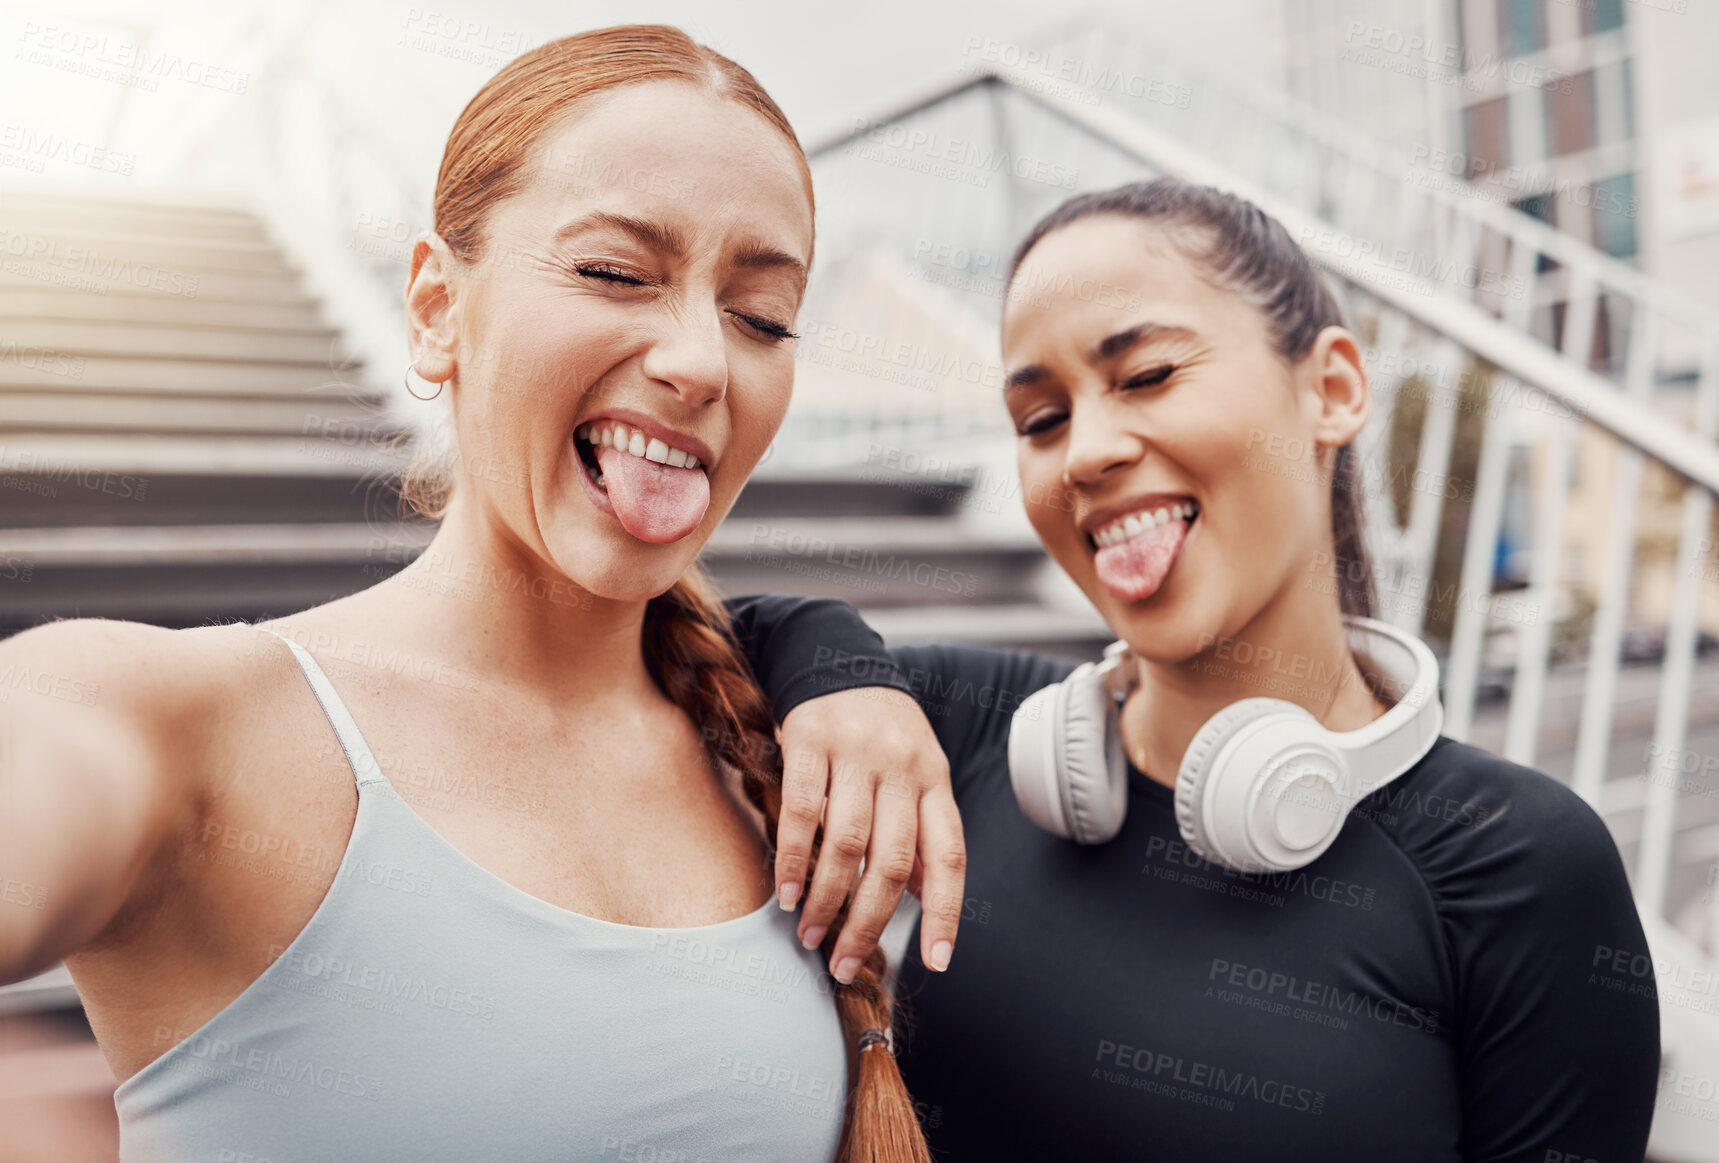 Buy stock photo Women, friends selfie and tongue in city for training, comic time or funny face with headphones in profile picture. Woman workout group, exercise photo or social media by stairs in metro with support